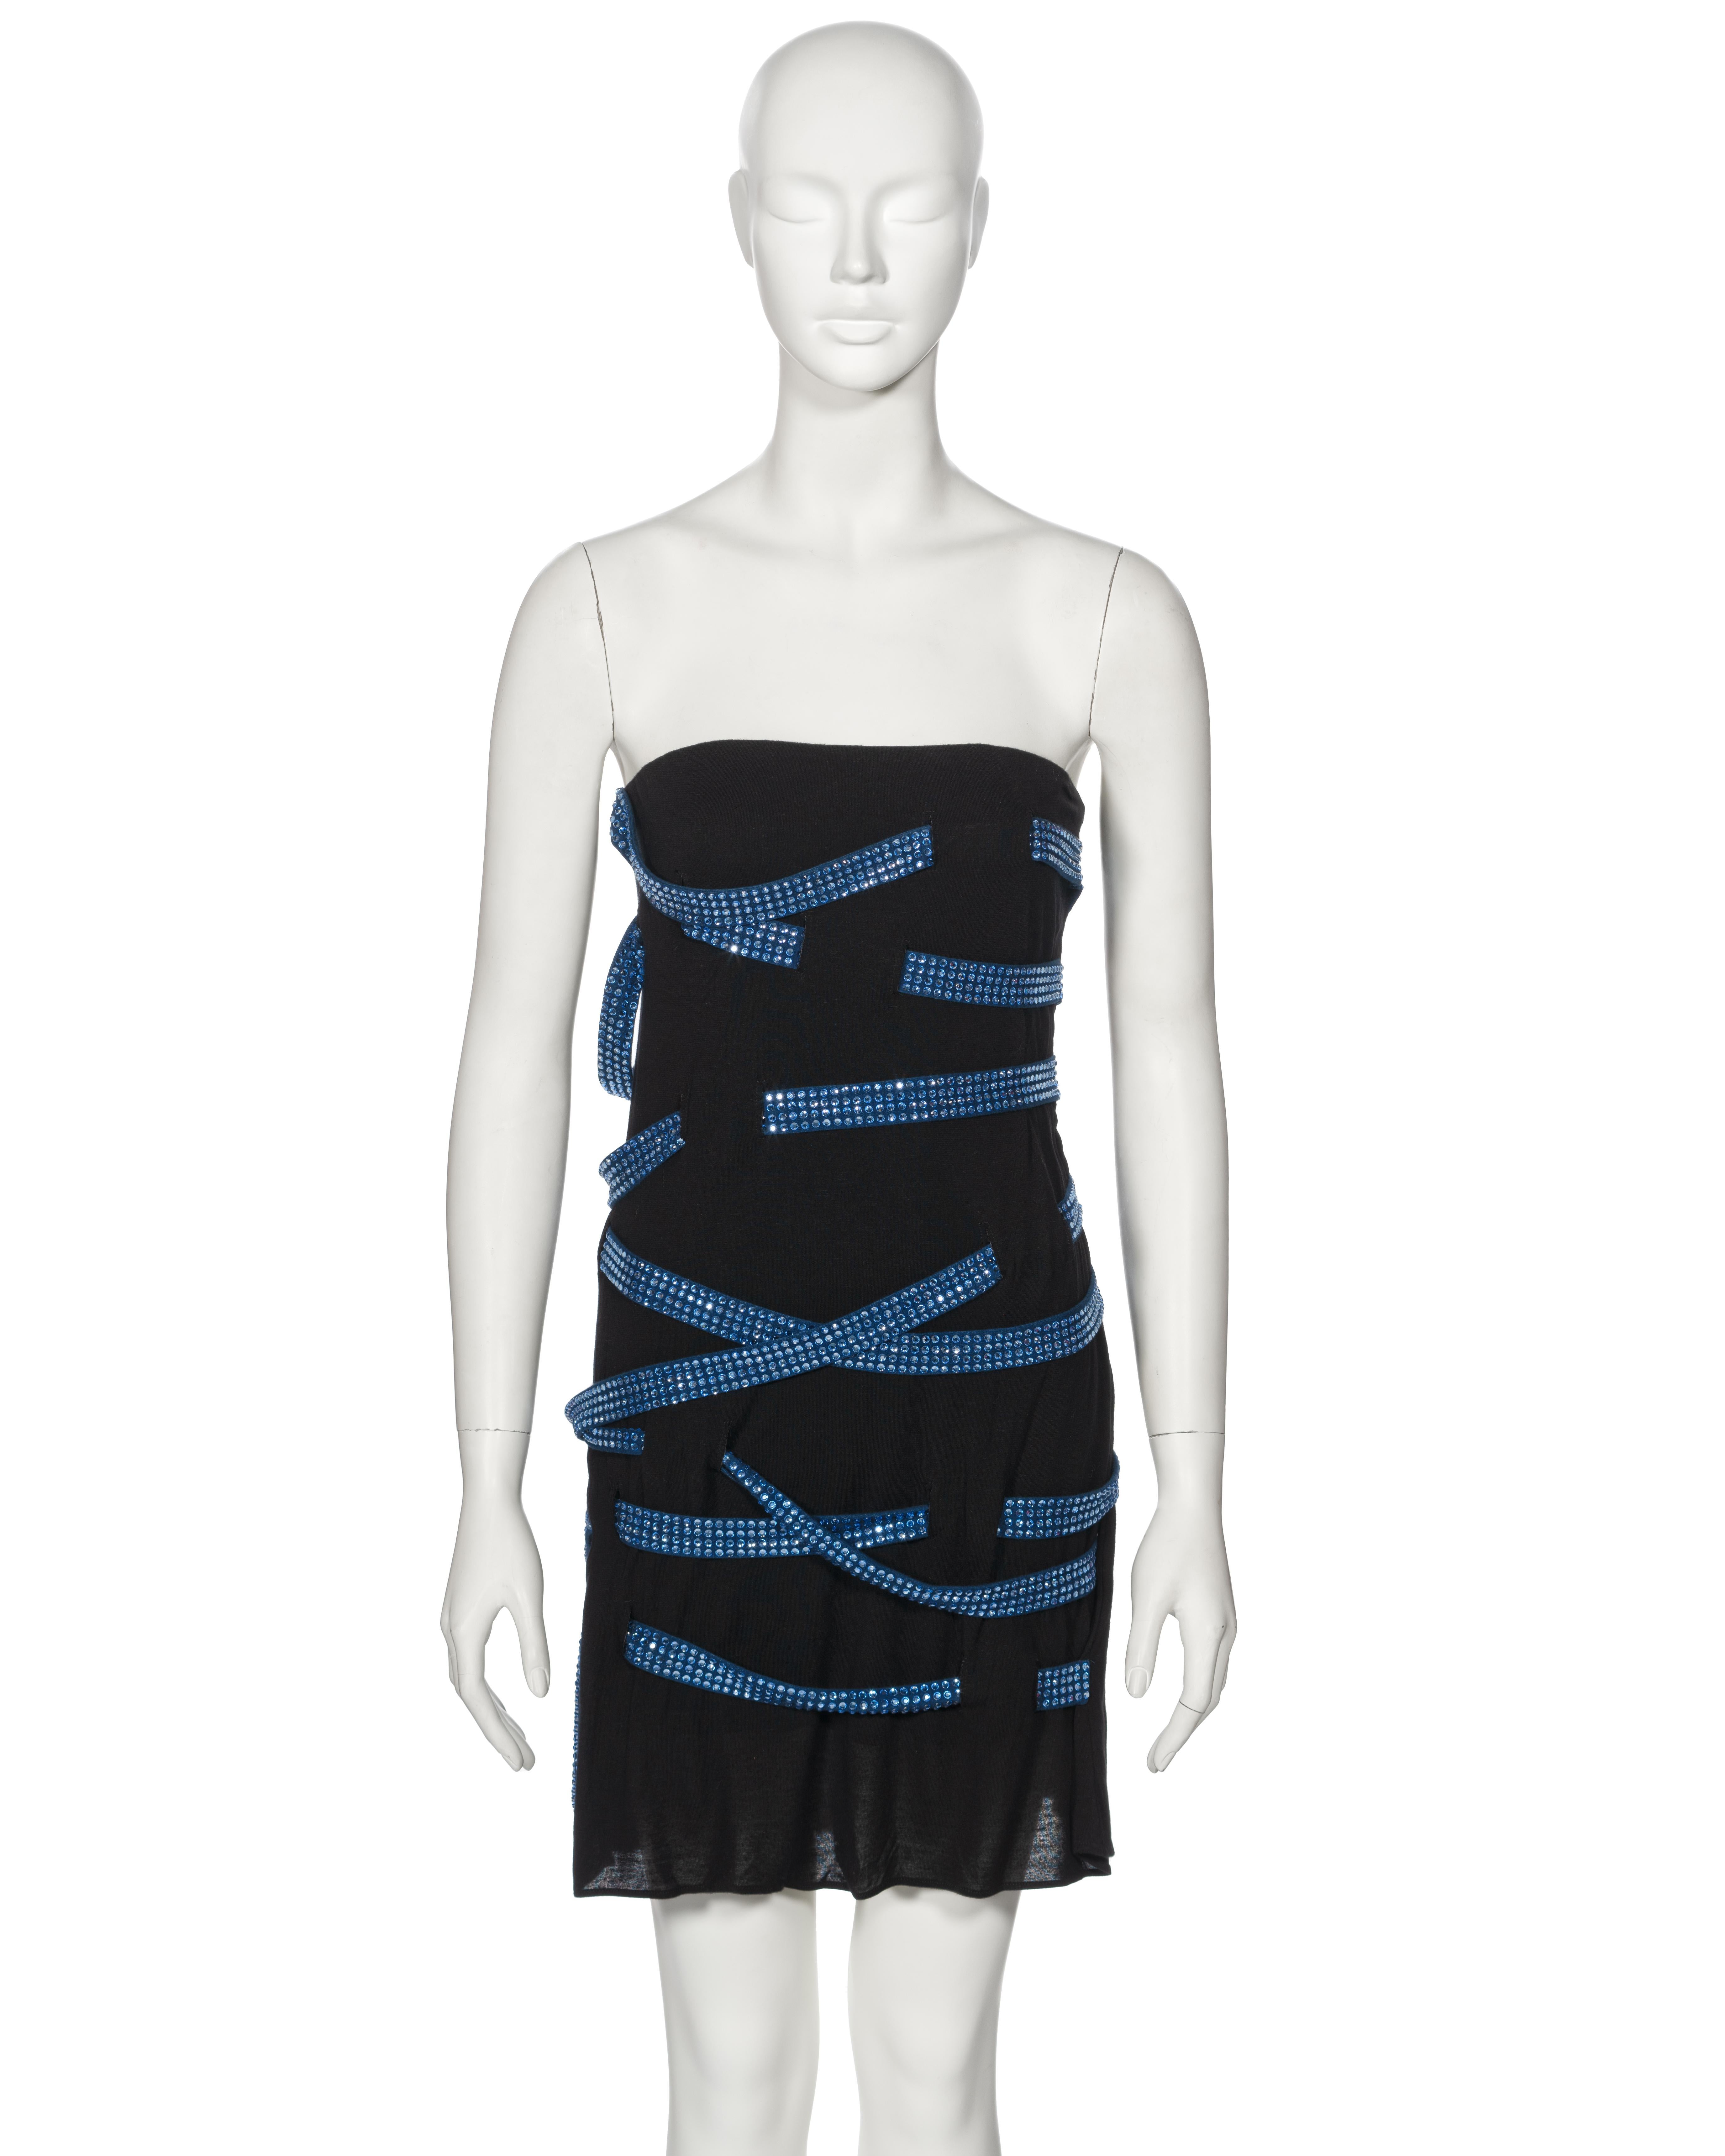 ▪ Archival Margiela Black Crystal-Laced Viscose Mini Dress
▪ Creative Director: Martin Margiela
▪ Spring-Summer 2009
▪ Sold by One of a Kind Archive 
▪ Black viscose jersey construction
▪ Crystal-adorned denim blue lacing, weaving throughout the